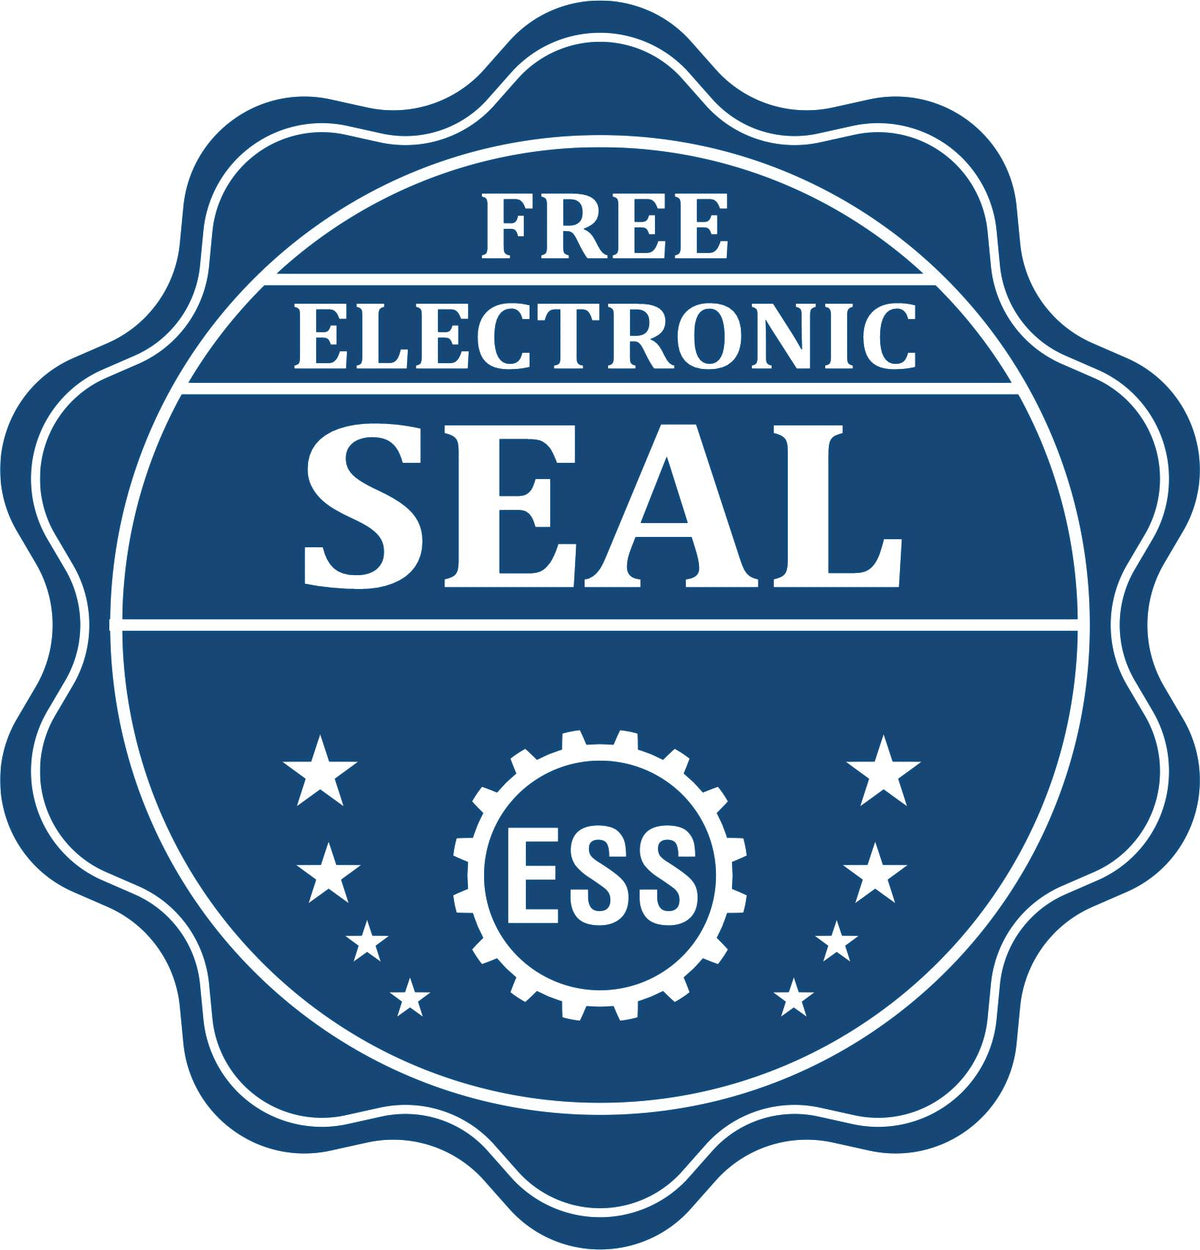 A badge showing a free electronic seal for the Hybrid Indiana Landscape Architect Seal with stars and the ESS gear on the emblem.